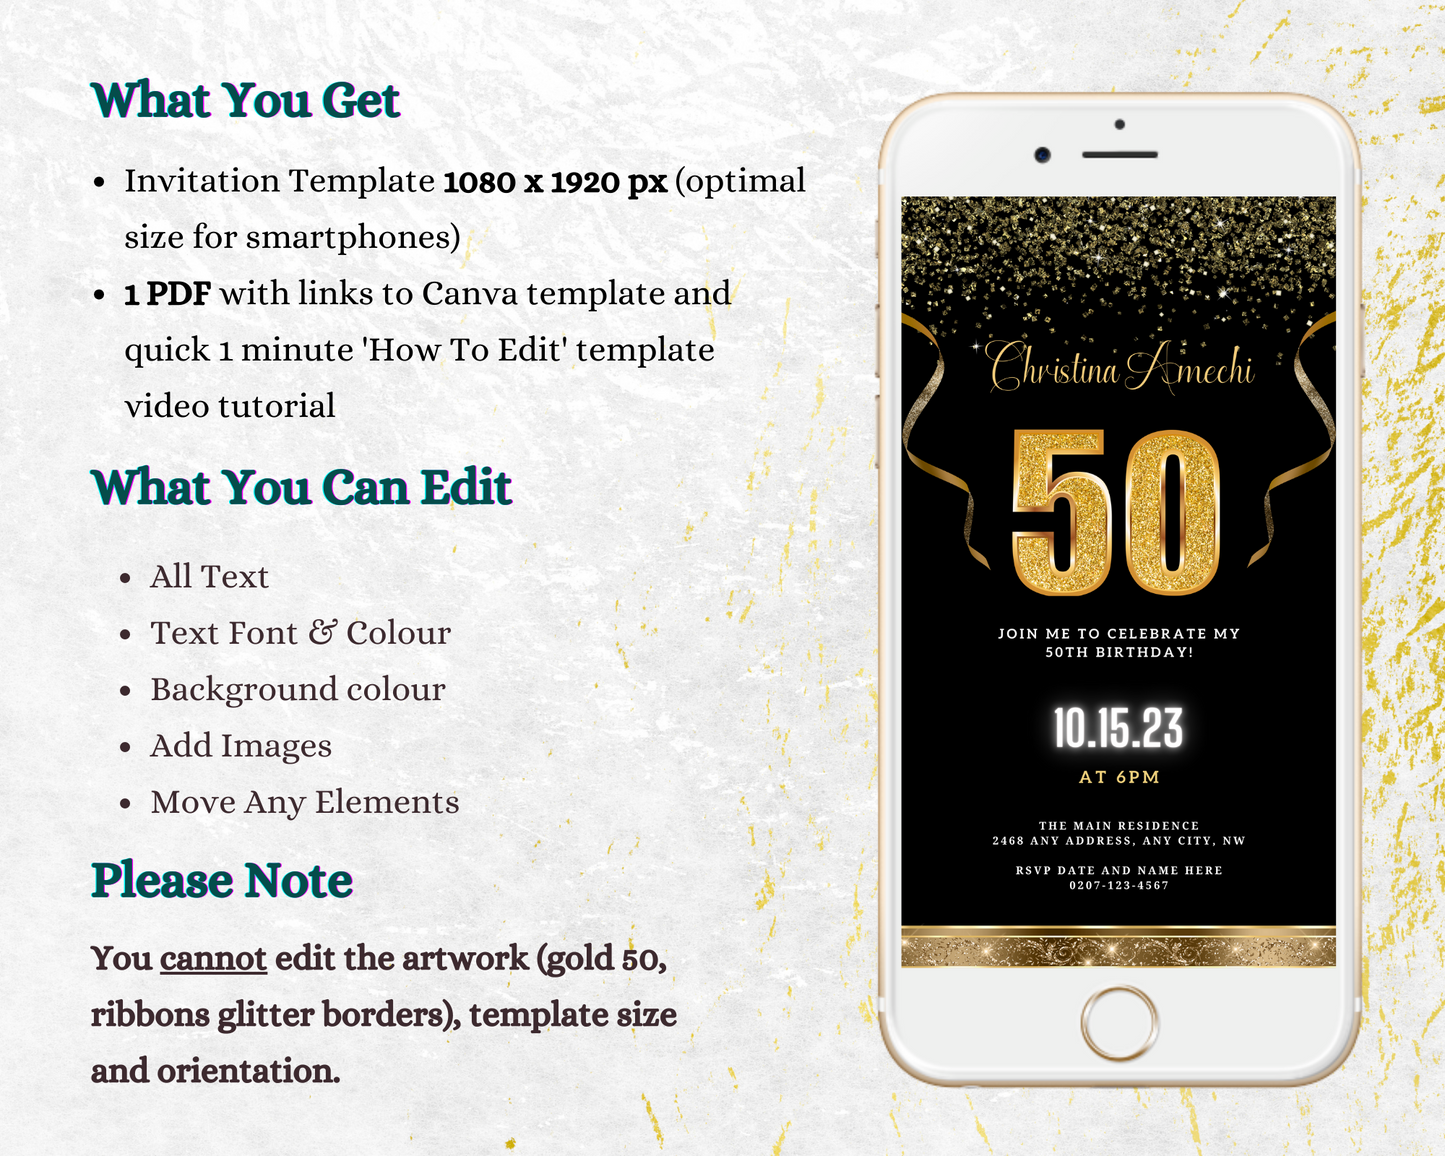 Customizable Black Gold Confetti 50th Birthday Evite displayed on a smartphone screen, featuring elegant gold text and designs for a digital invitation template.